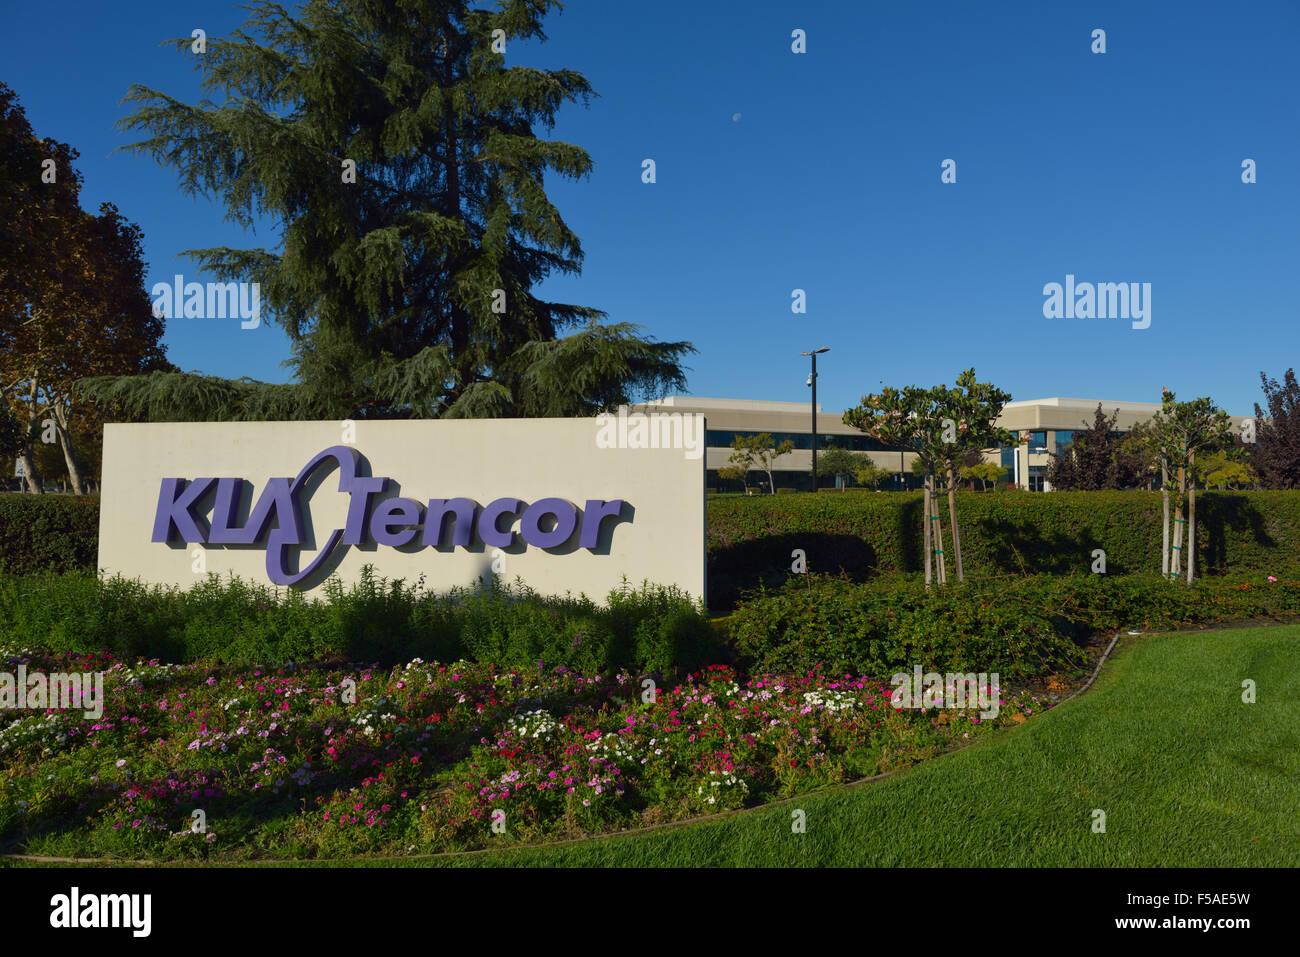 On 21st Oct 2015, LAM Research reached a settlement with KLA-Tencor to acquire them, Milpitas CA Stock Photo